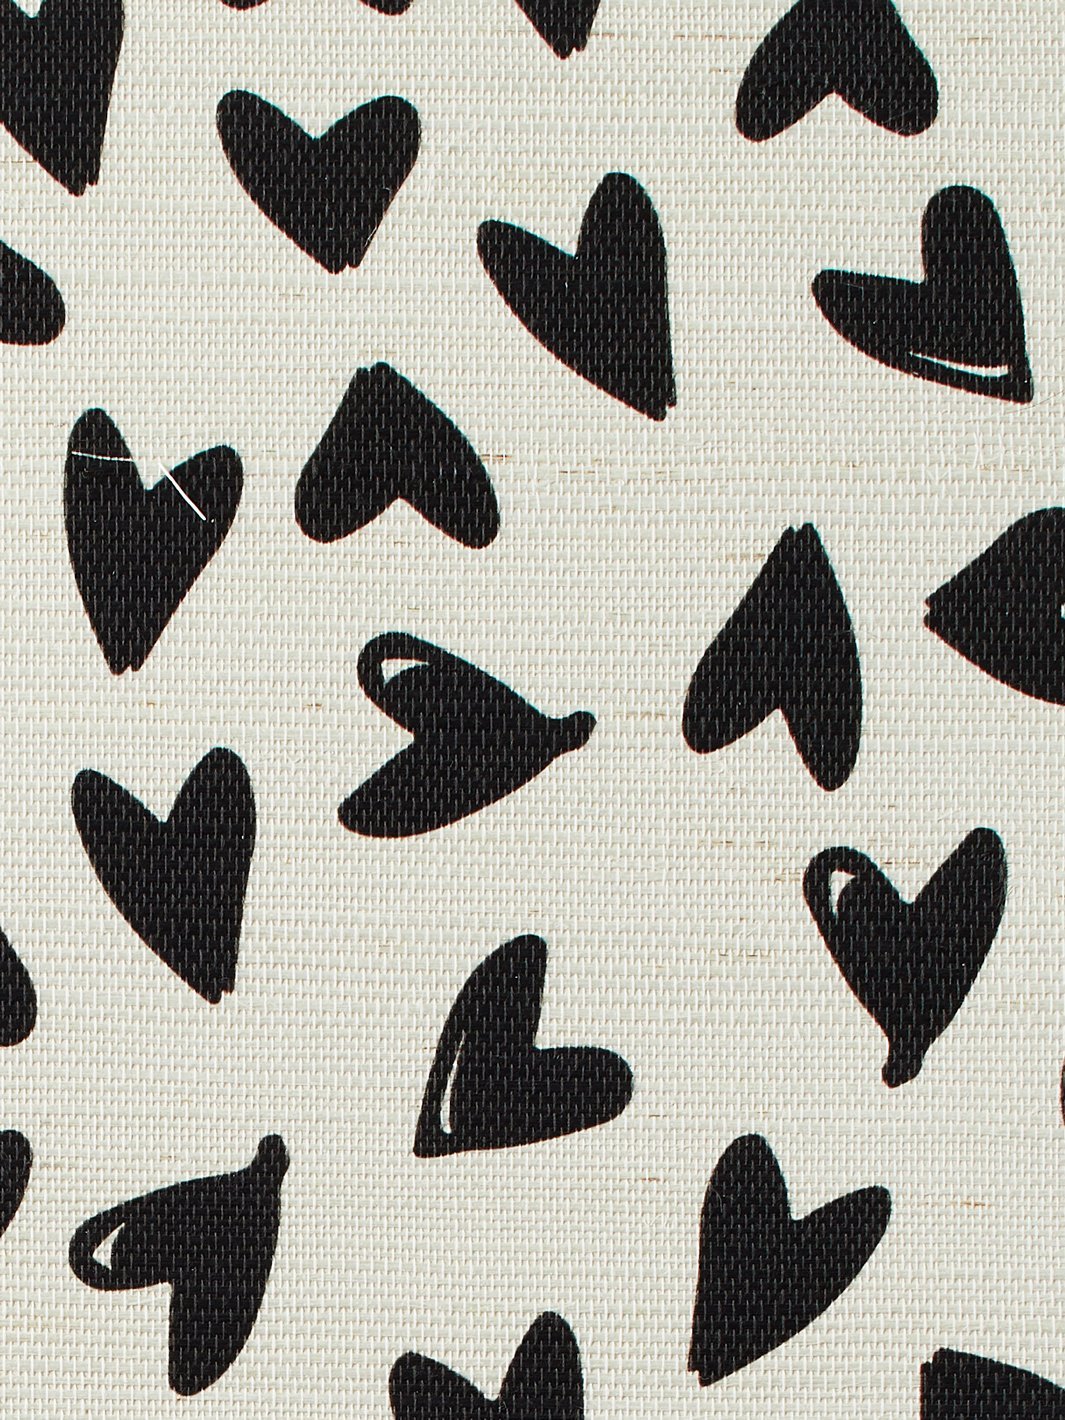 'Scattered Hearts' Grasscloth' Wallpaper by Sugar Paper - Black